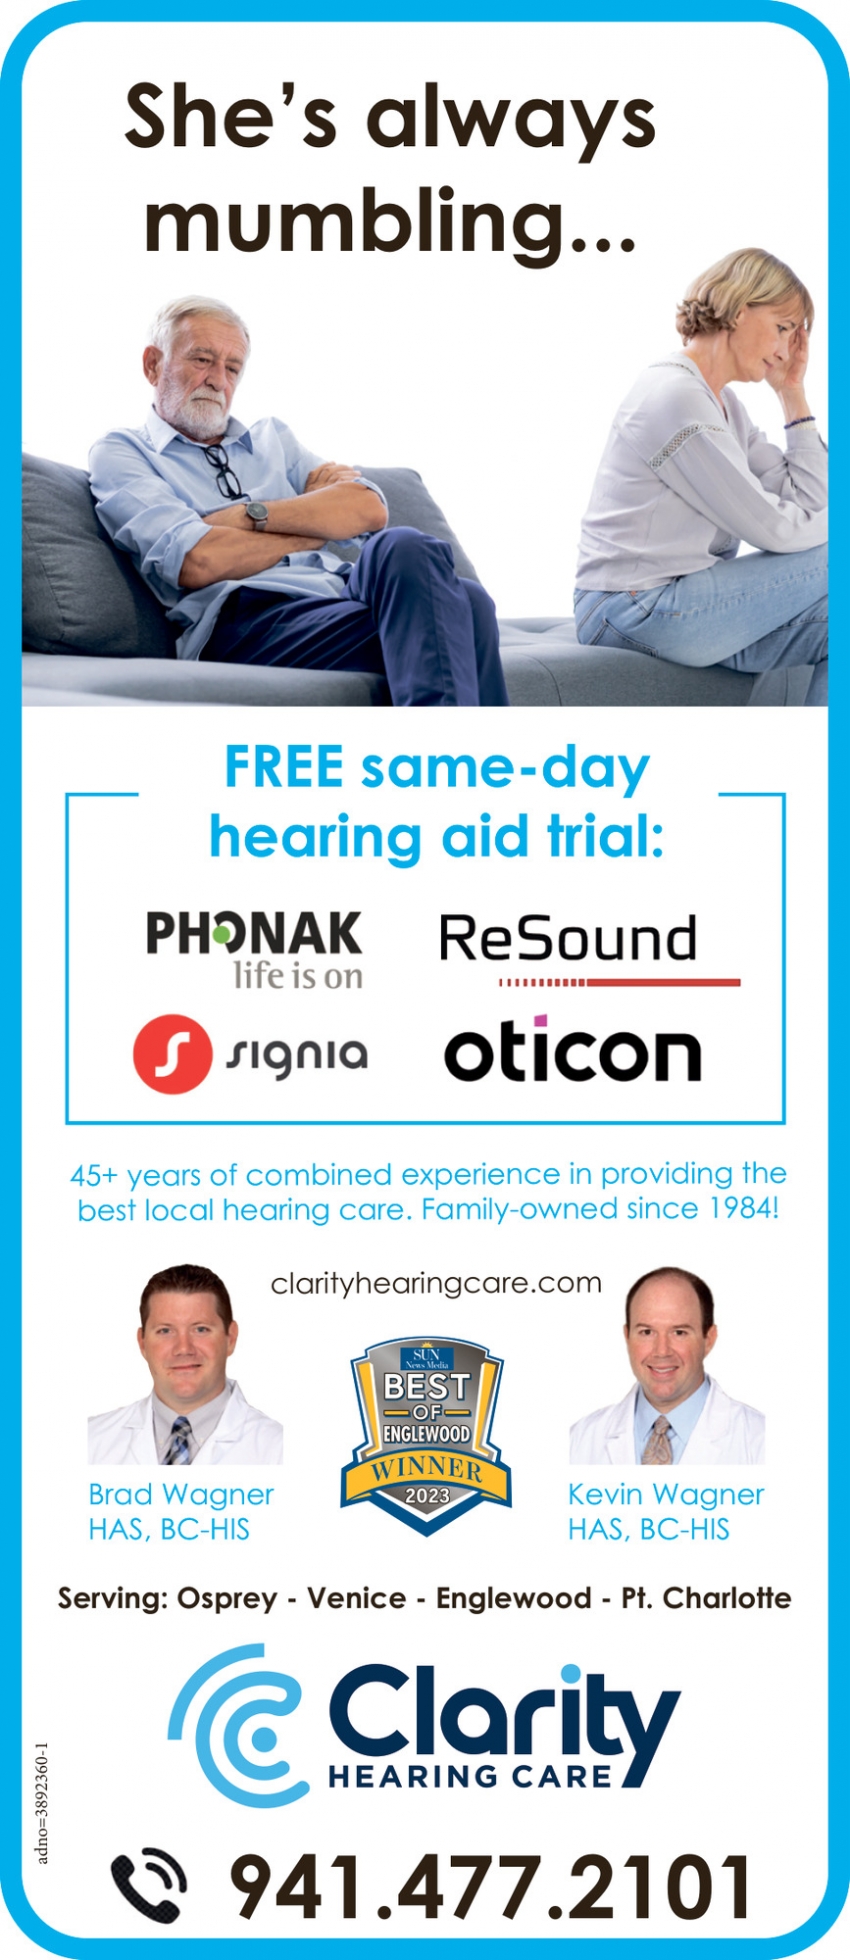 Free Same-Day Hearing Aid Trial